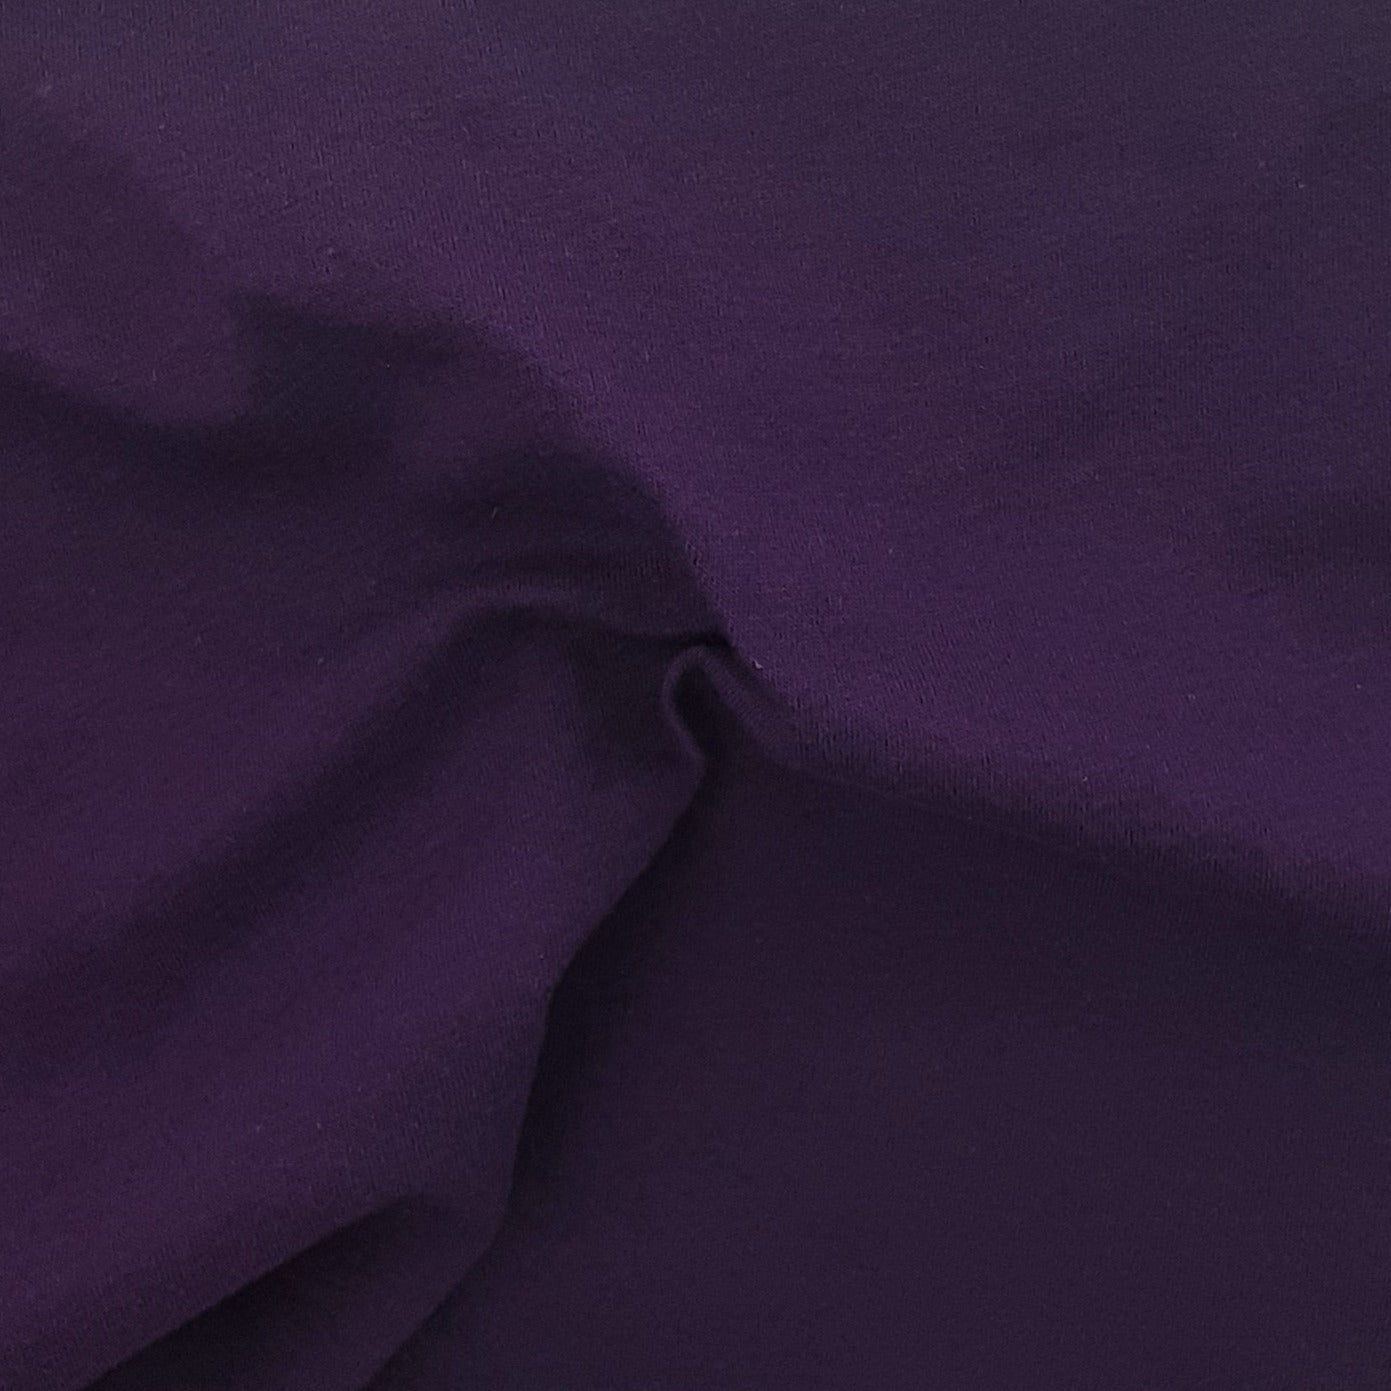 Eggplant #S63 8oz. Cotton/Spandex Jersey Knit Fabric - SKU 6827A — Nick Of  Time Textiles